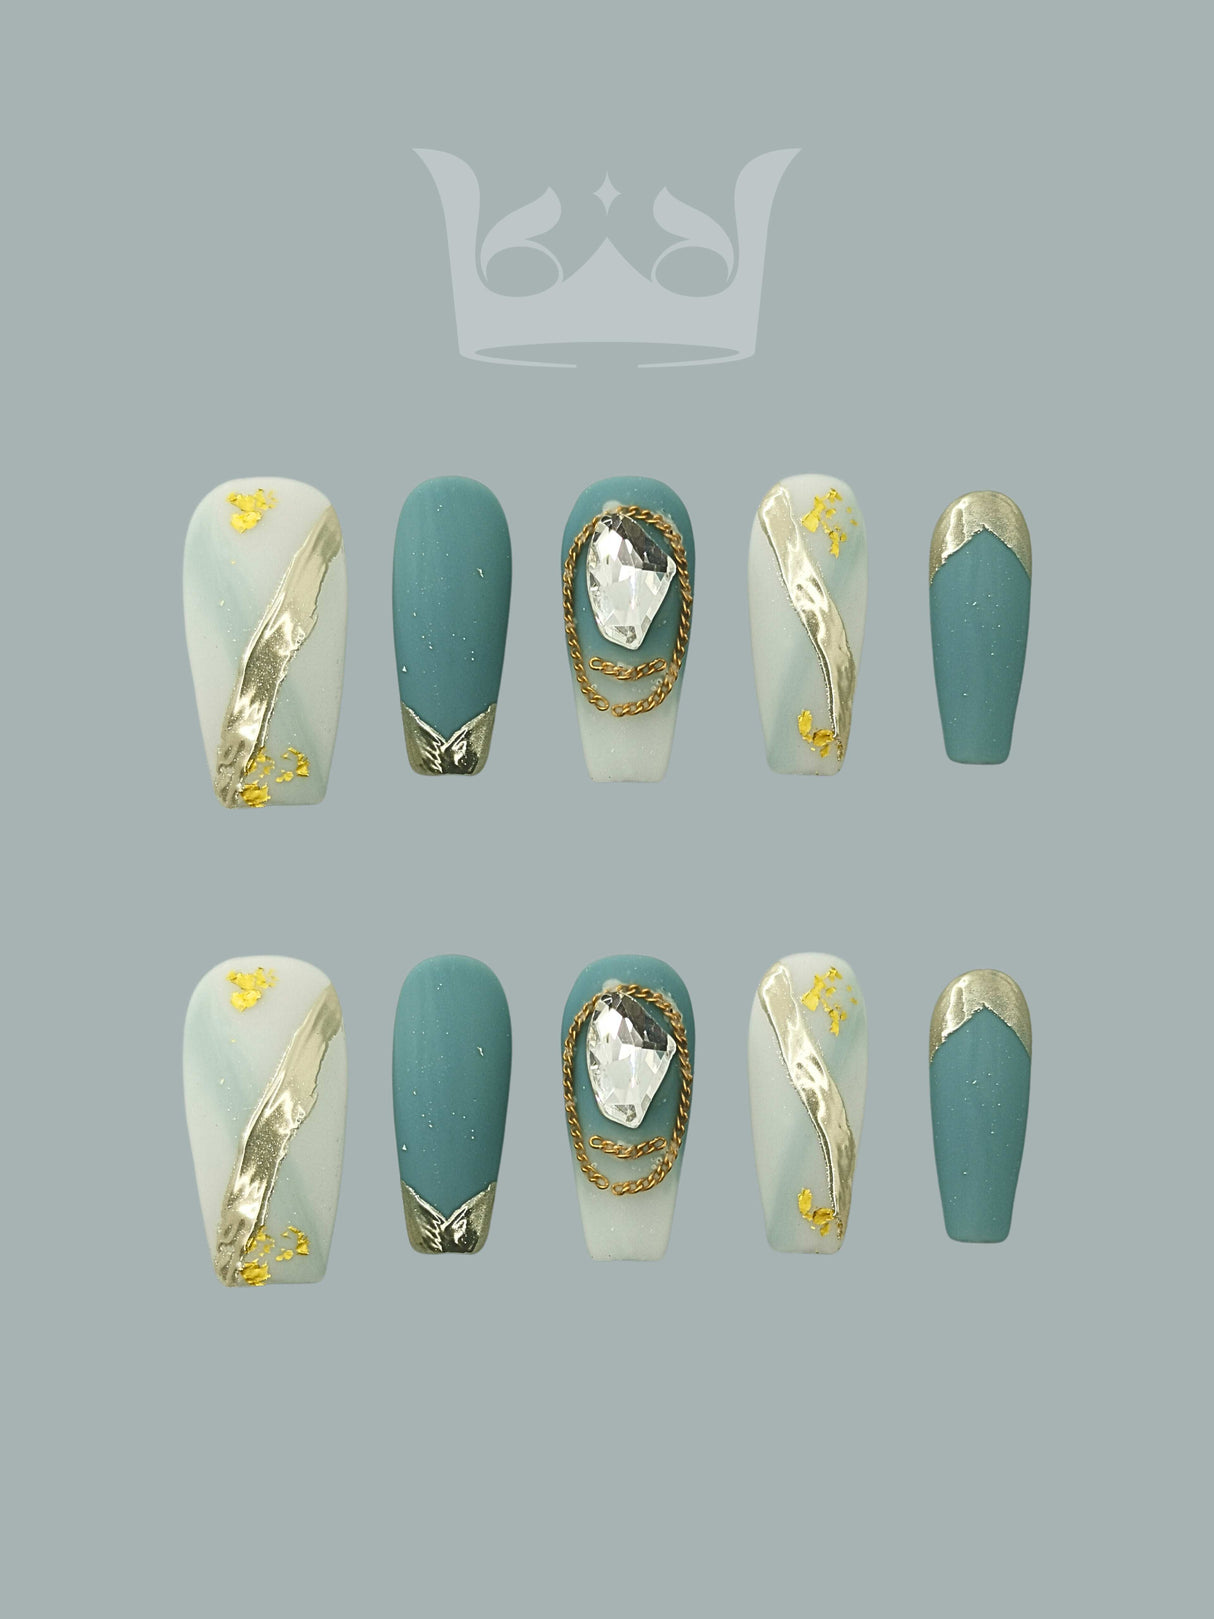 These ornate nails with soft mint and translucent colors, gold foil accents, rhinestones, and varying shapes are suitable for special occasions or fashion statements.